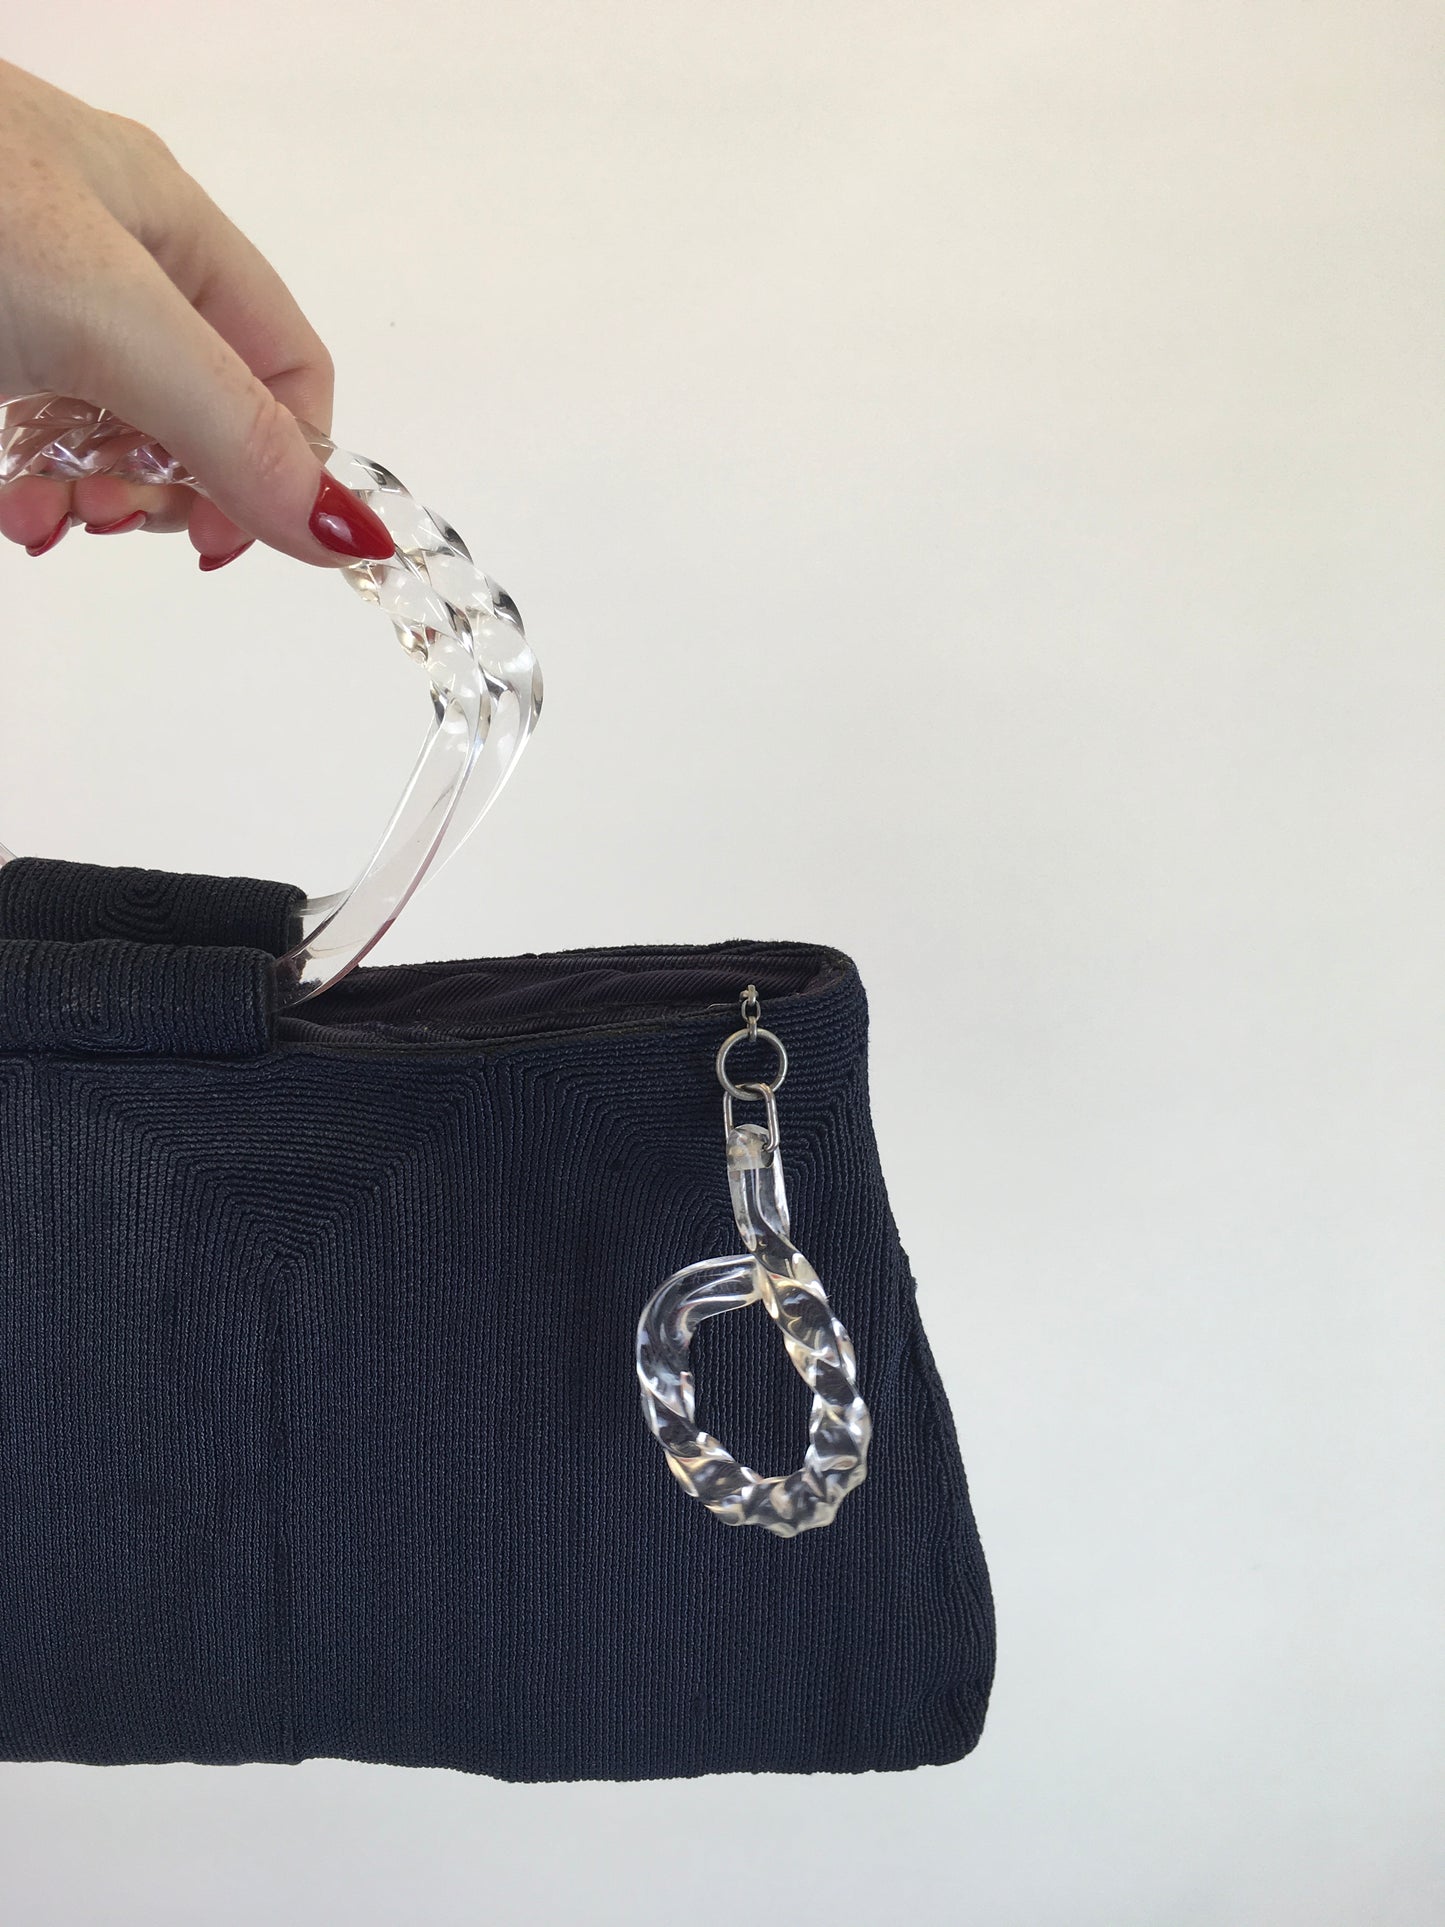 Original 1940’s STUNNING Navy ‘ Corde’ Handbag - With Twisted Lucite Double Handle and Chunky Pull